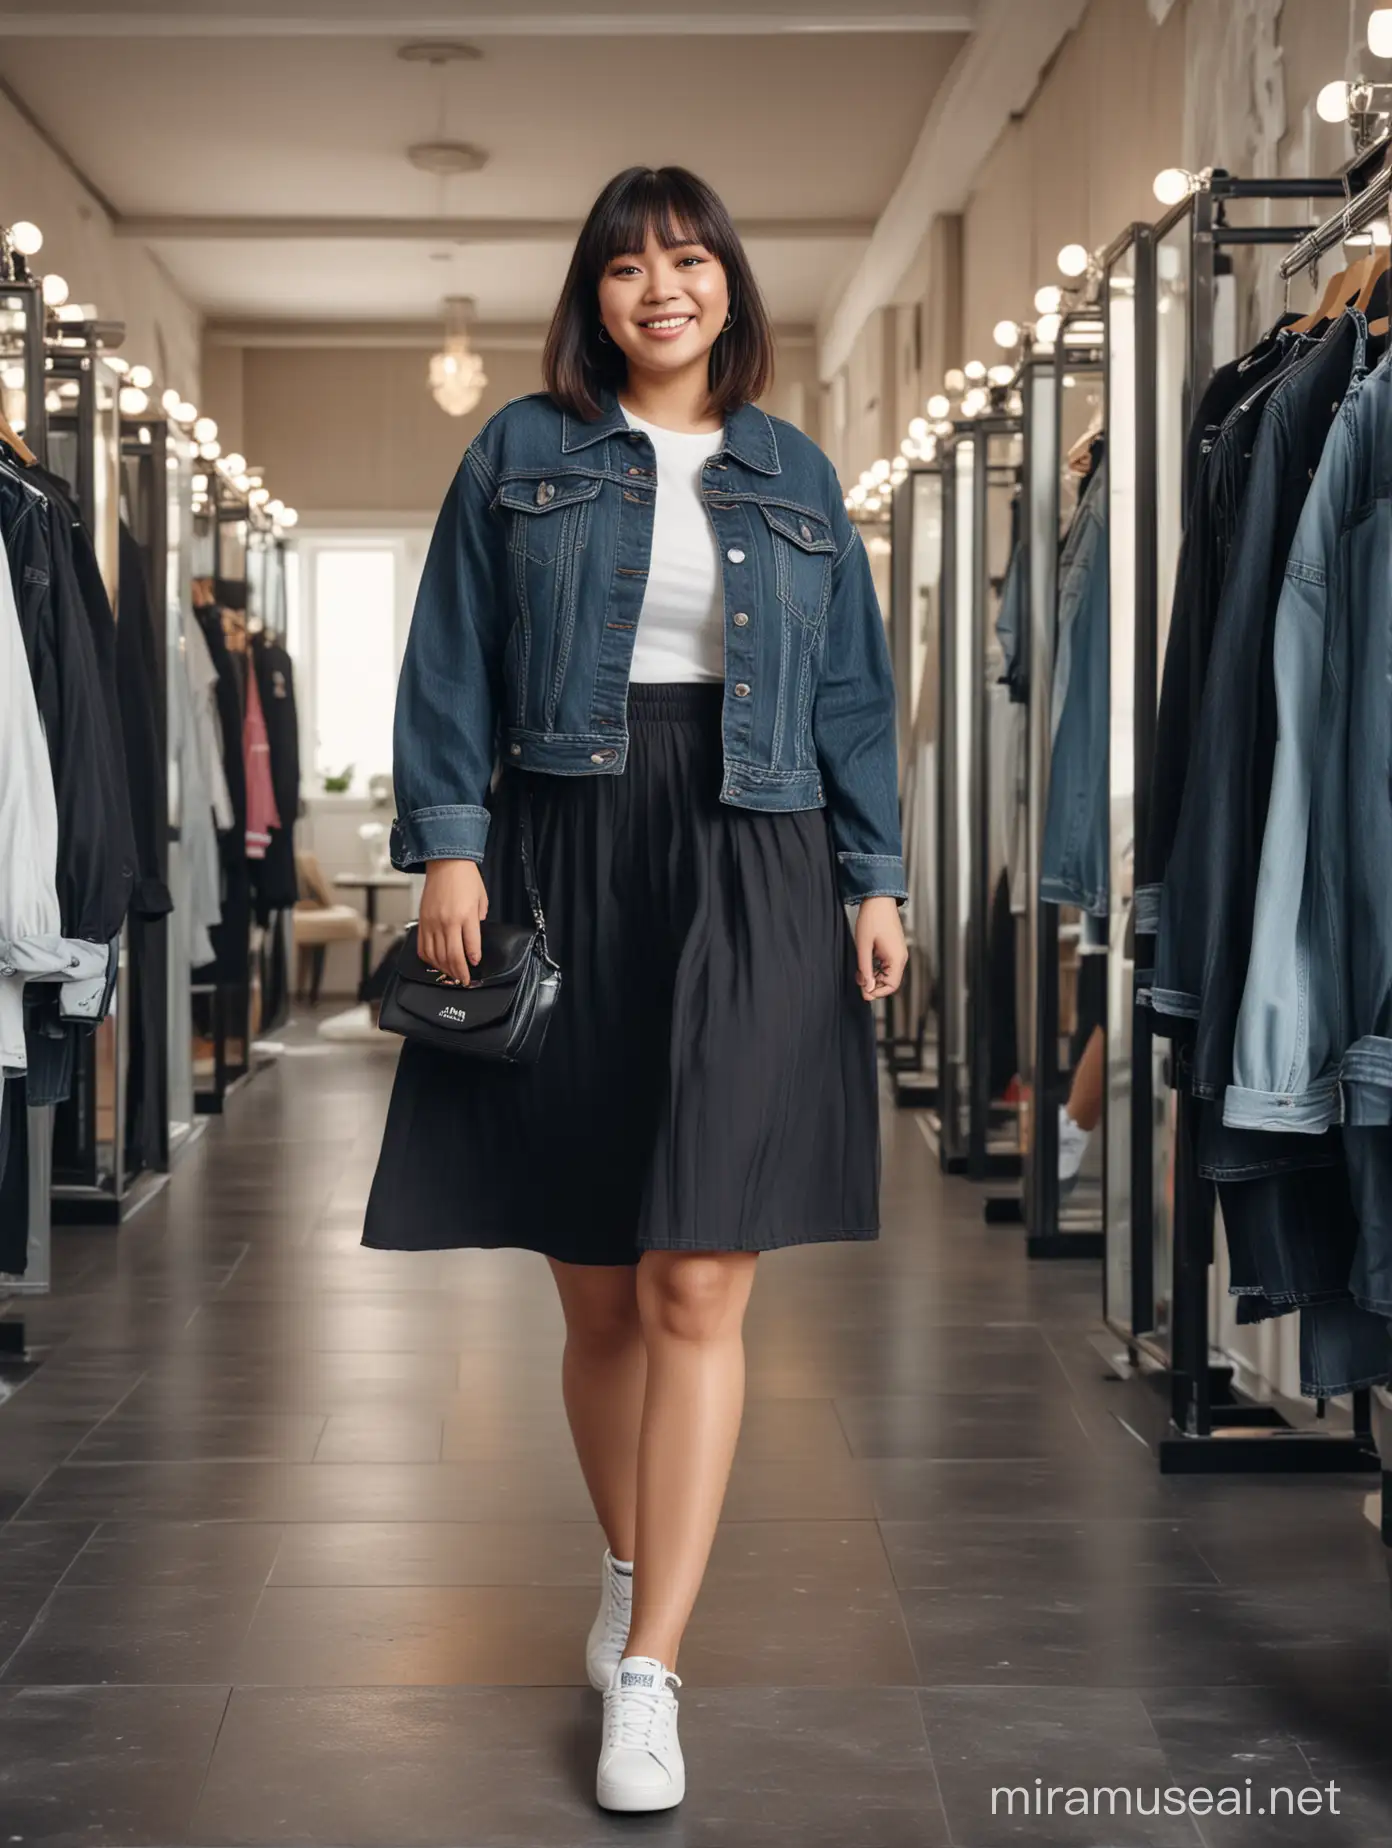 Smiling Indonesian Woman in Stylish Black Dress and Jeans Jacket in Mirrored Room